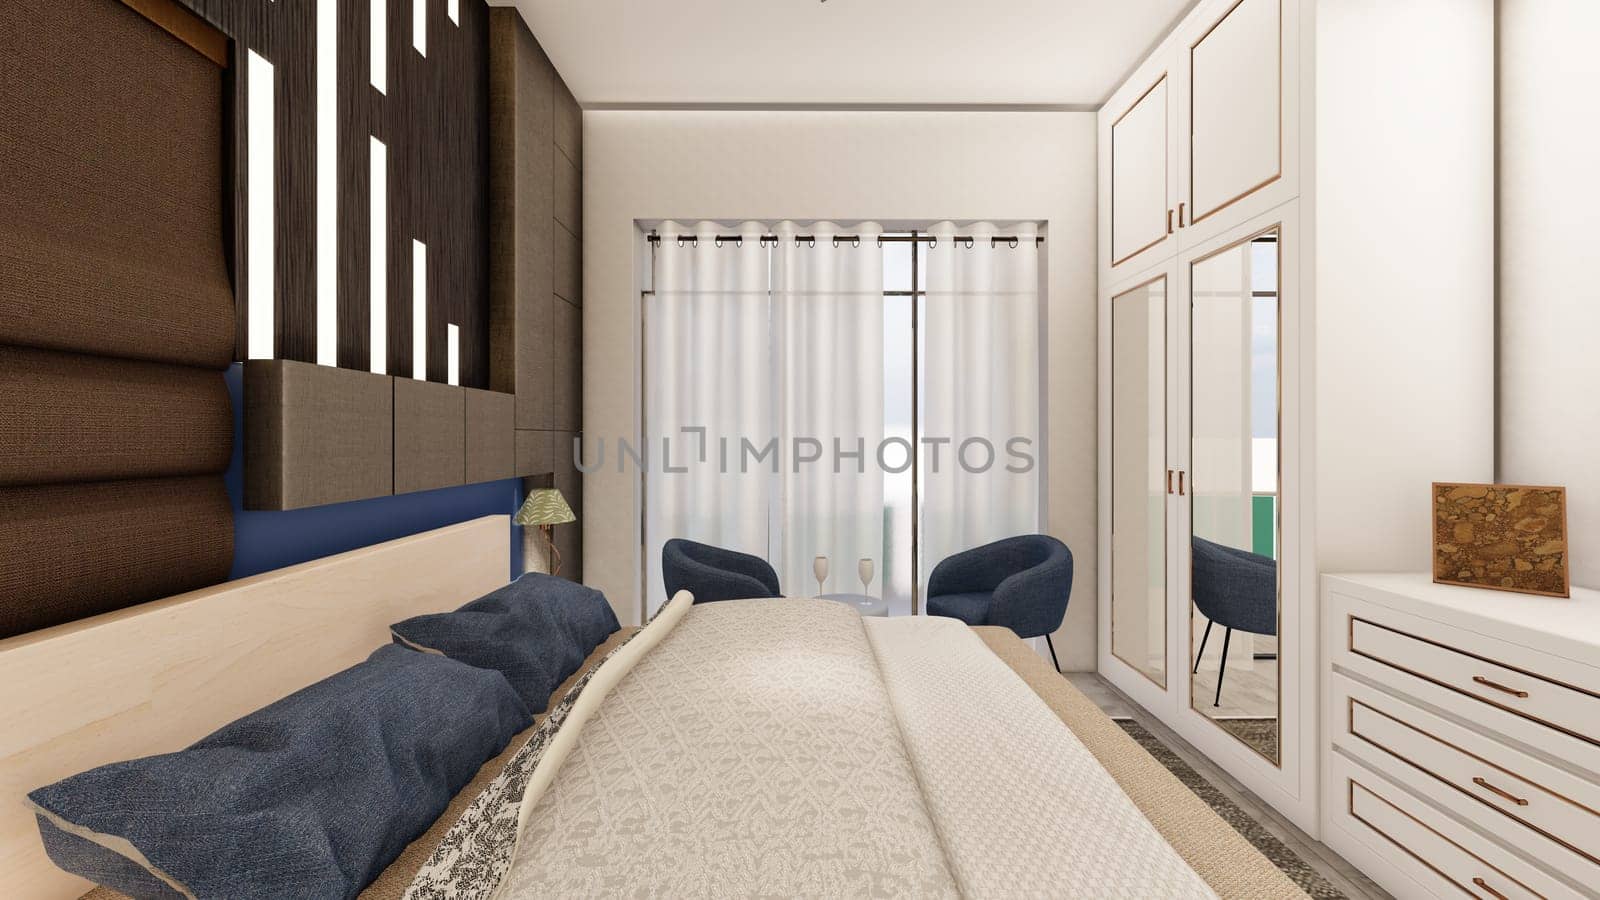 Realistic dark brown and blue bedroom interior with wooden furniture 3d rendering by shawlinmohd